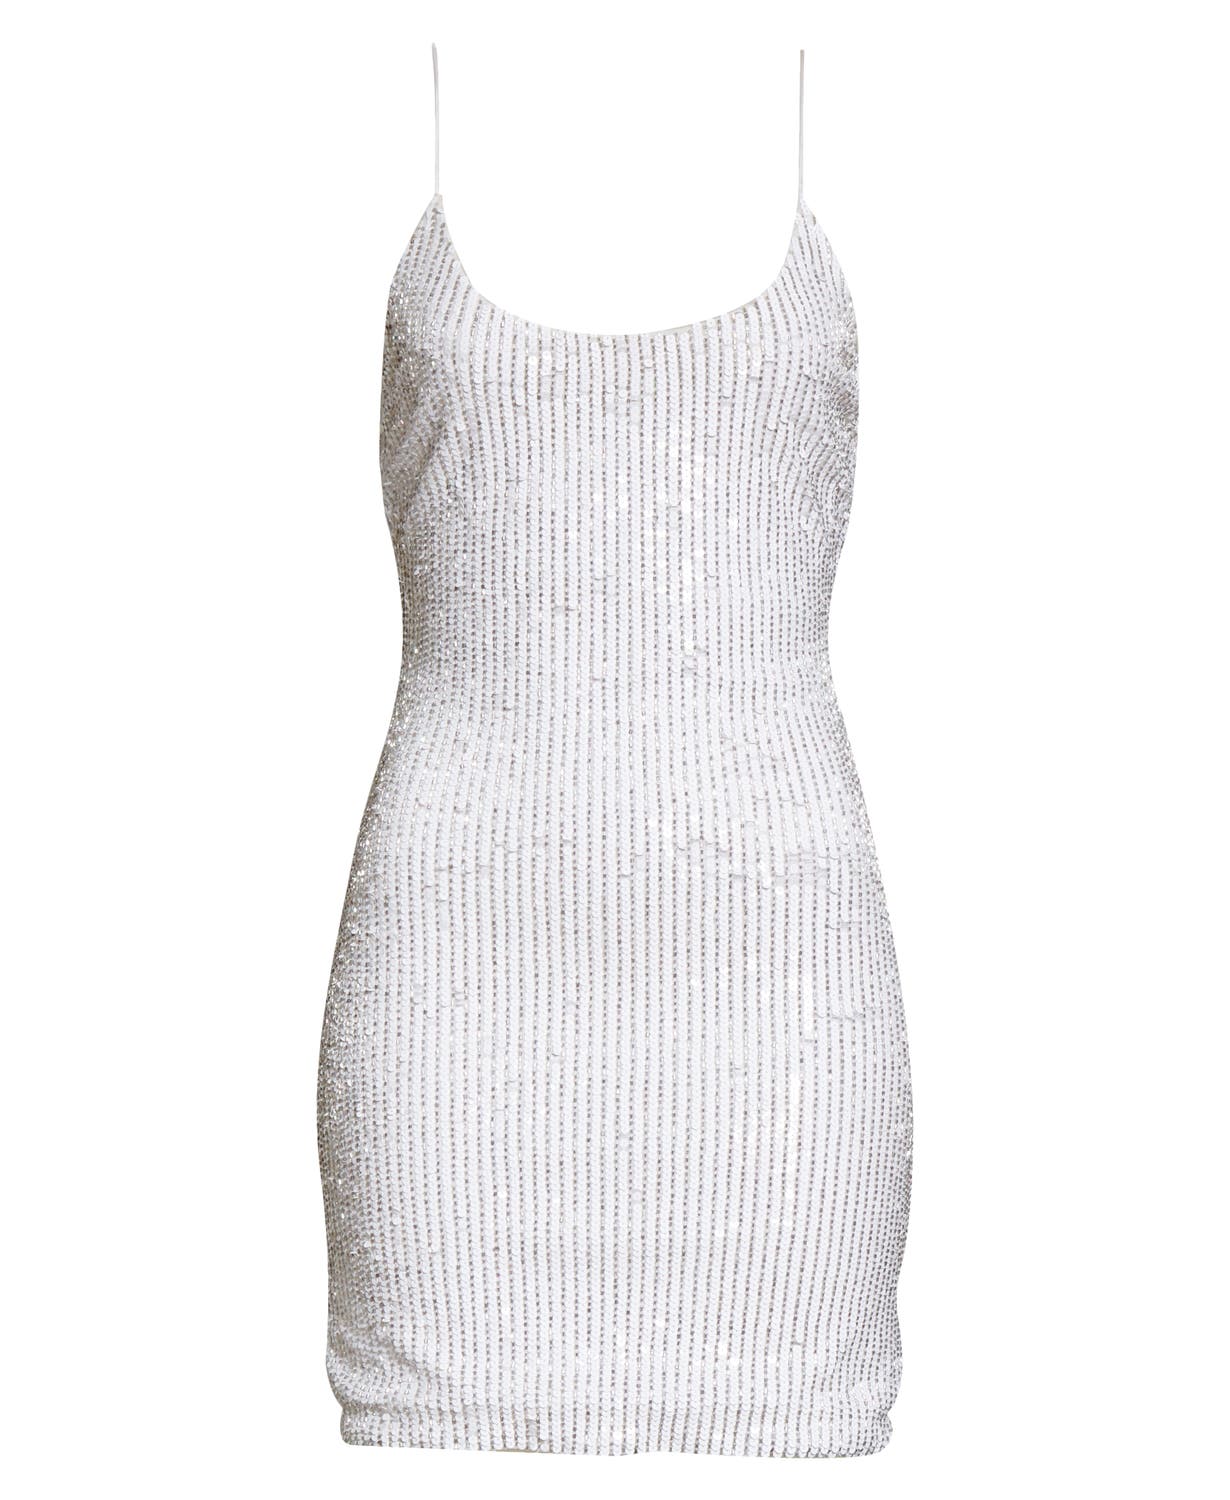 woocommerce-673321-2209615.cloudwaysapps.com-alice-and-olivia-womens-white-nelle-fitted-embellished-mini-dress